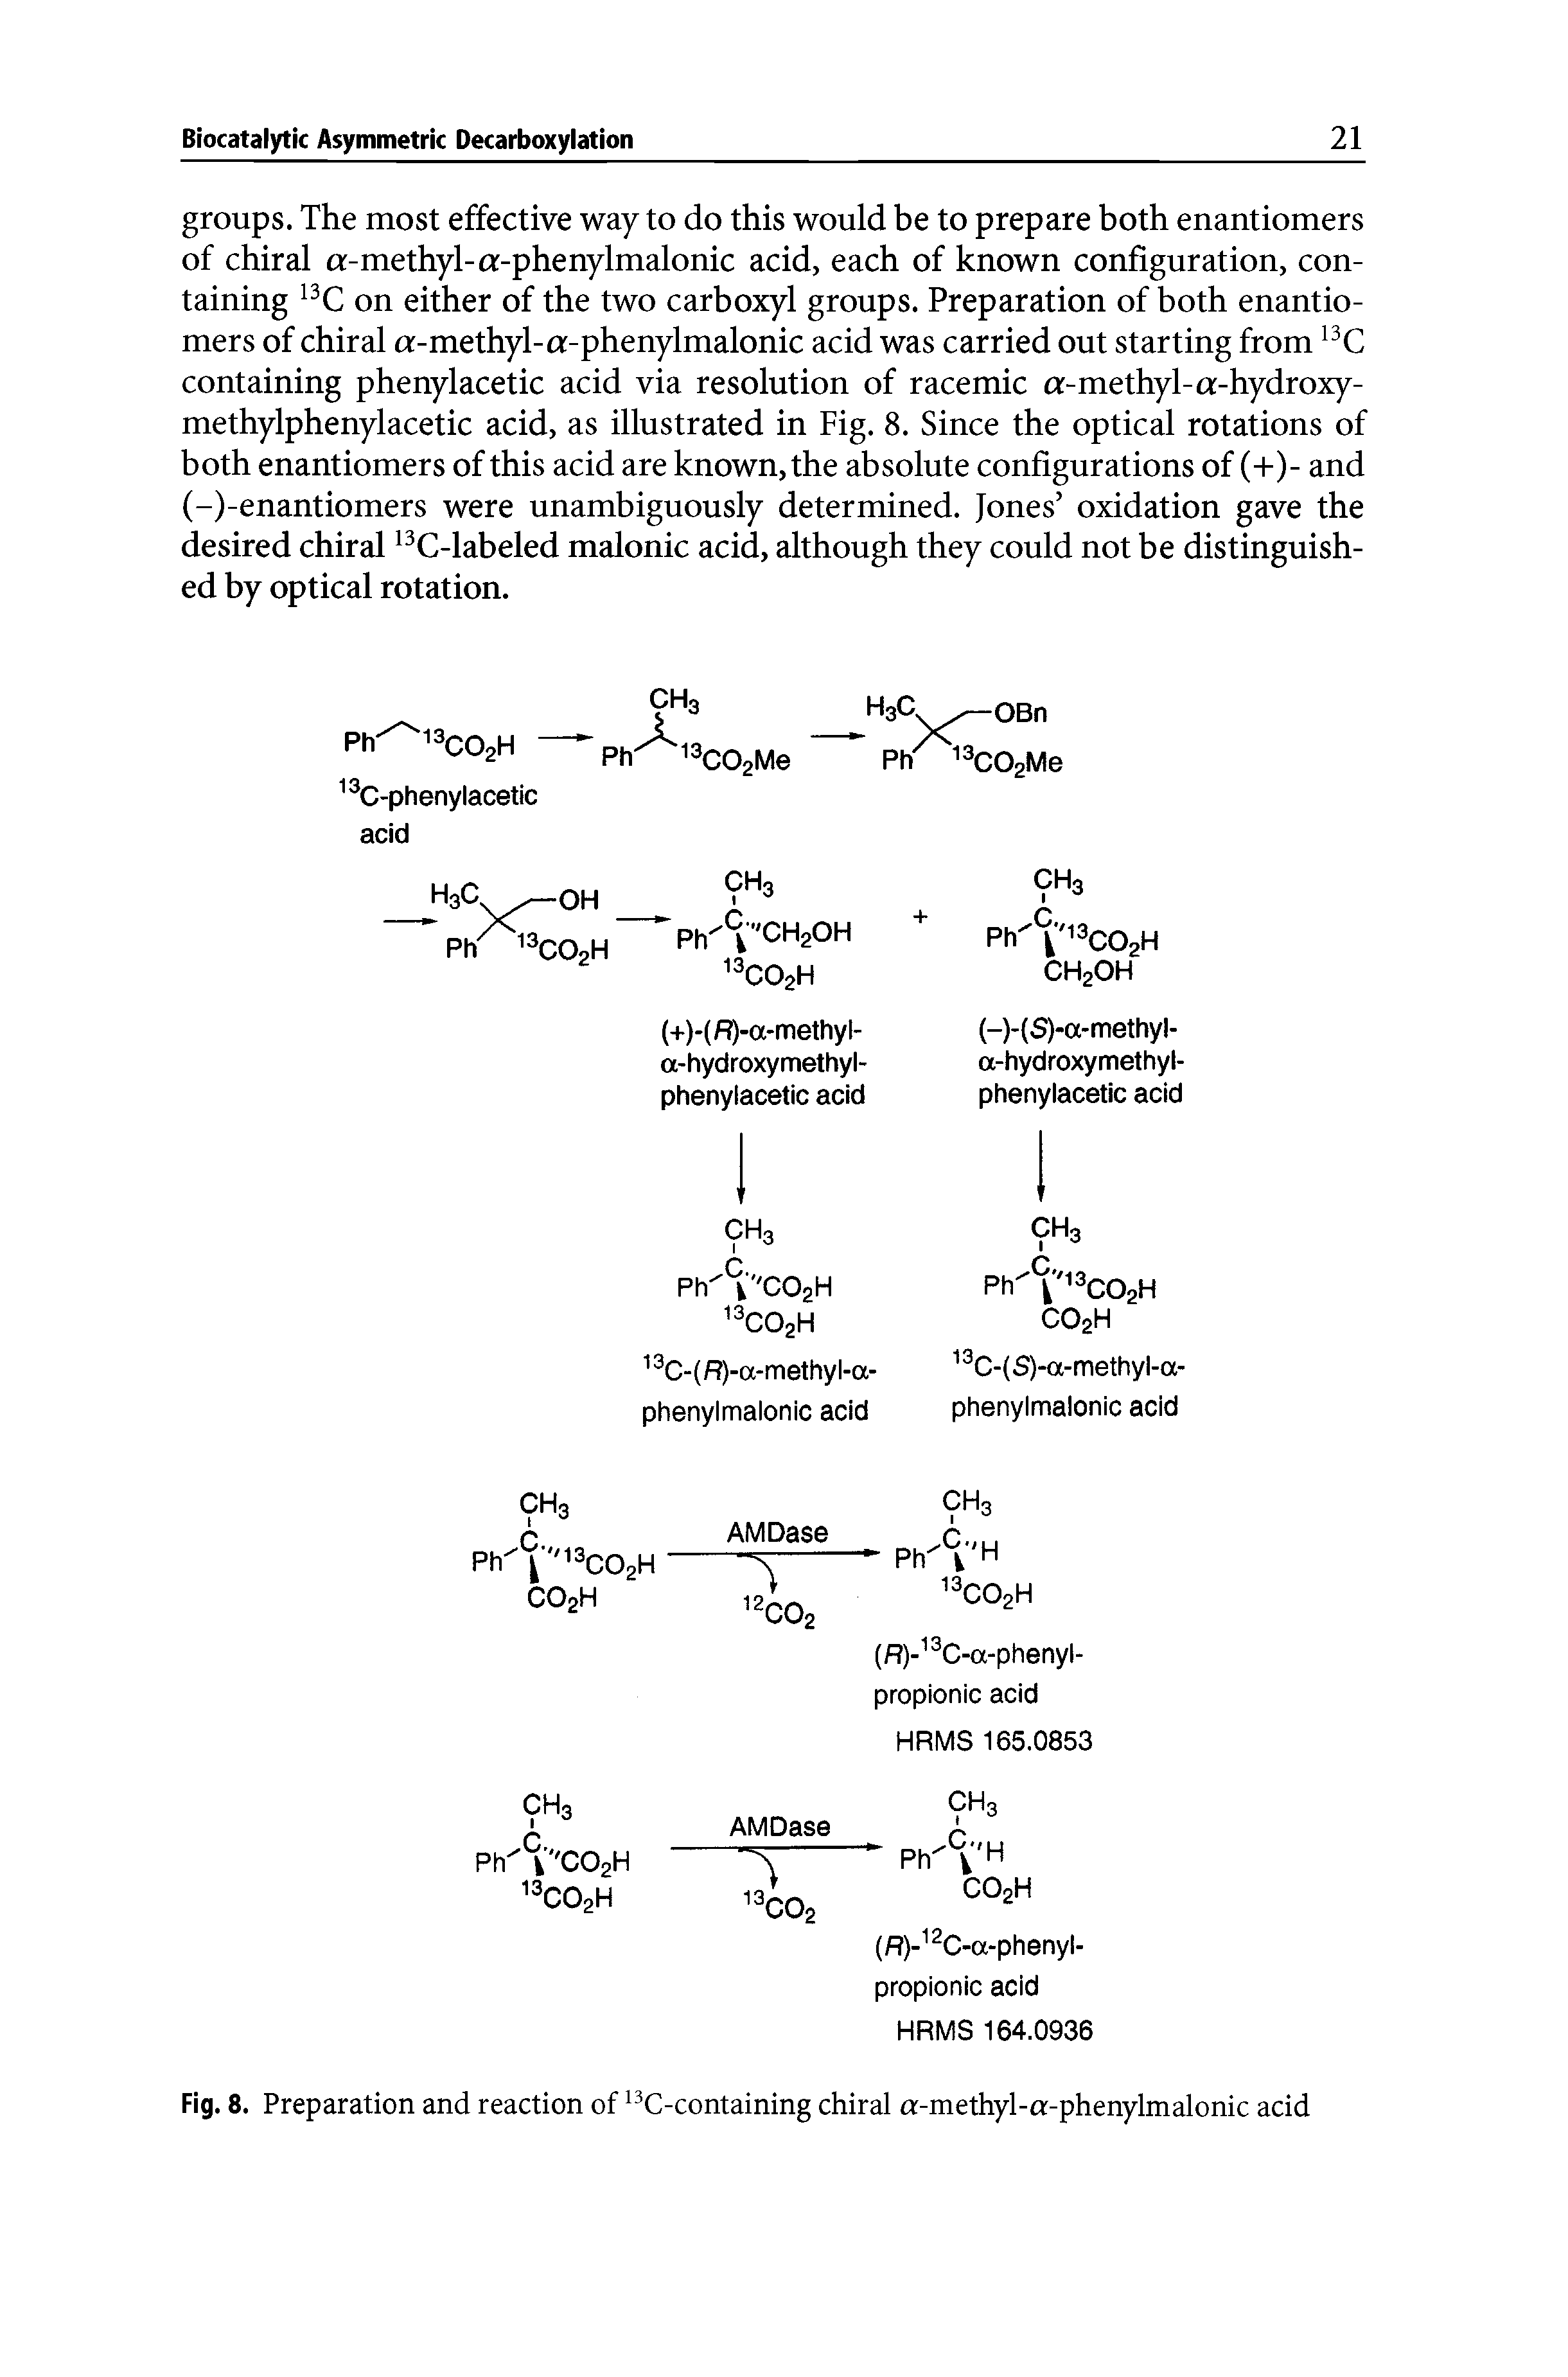 Fig. 8. Preparation and reaction of C-containing chiral a-methyl-a-phenylmalonic acid...